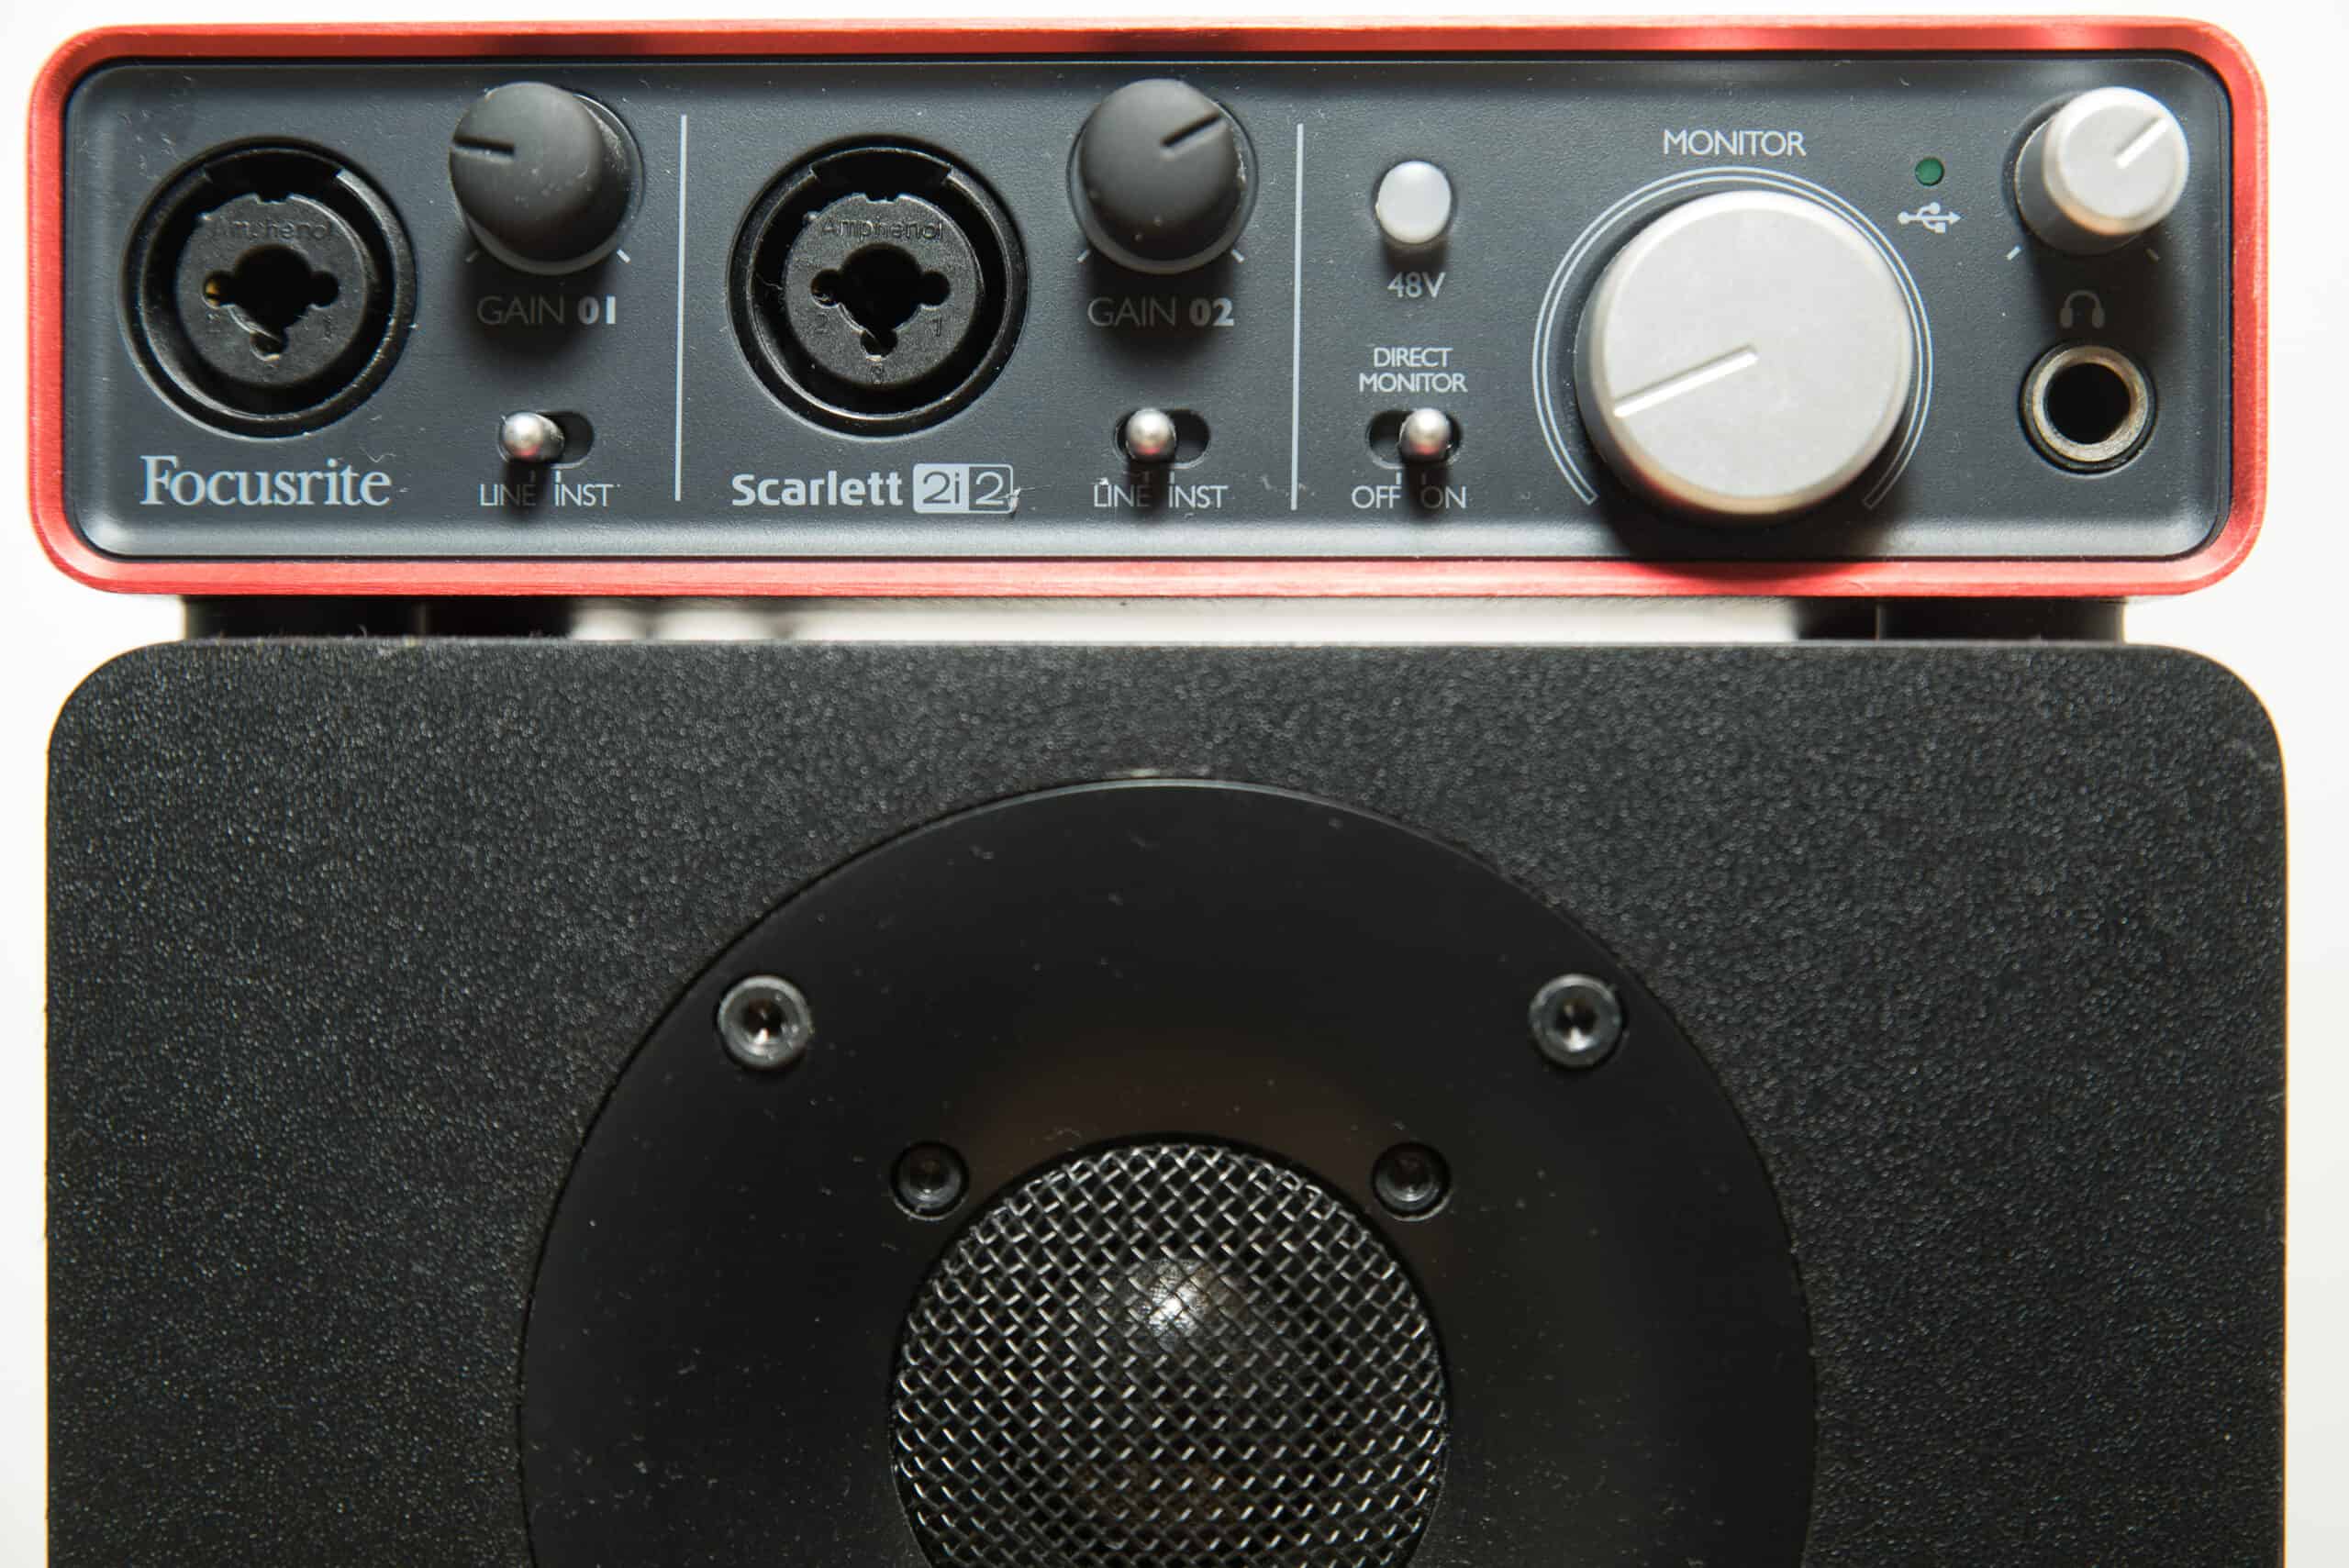 How to Record with Focusrite Scarlett 2i2 3rd Gen